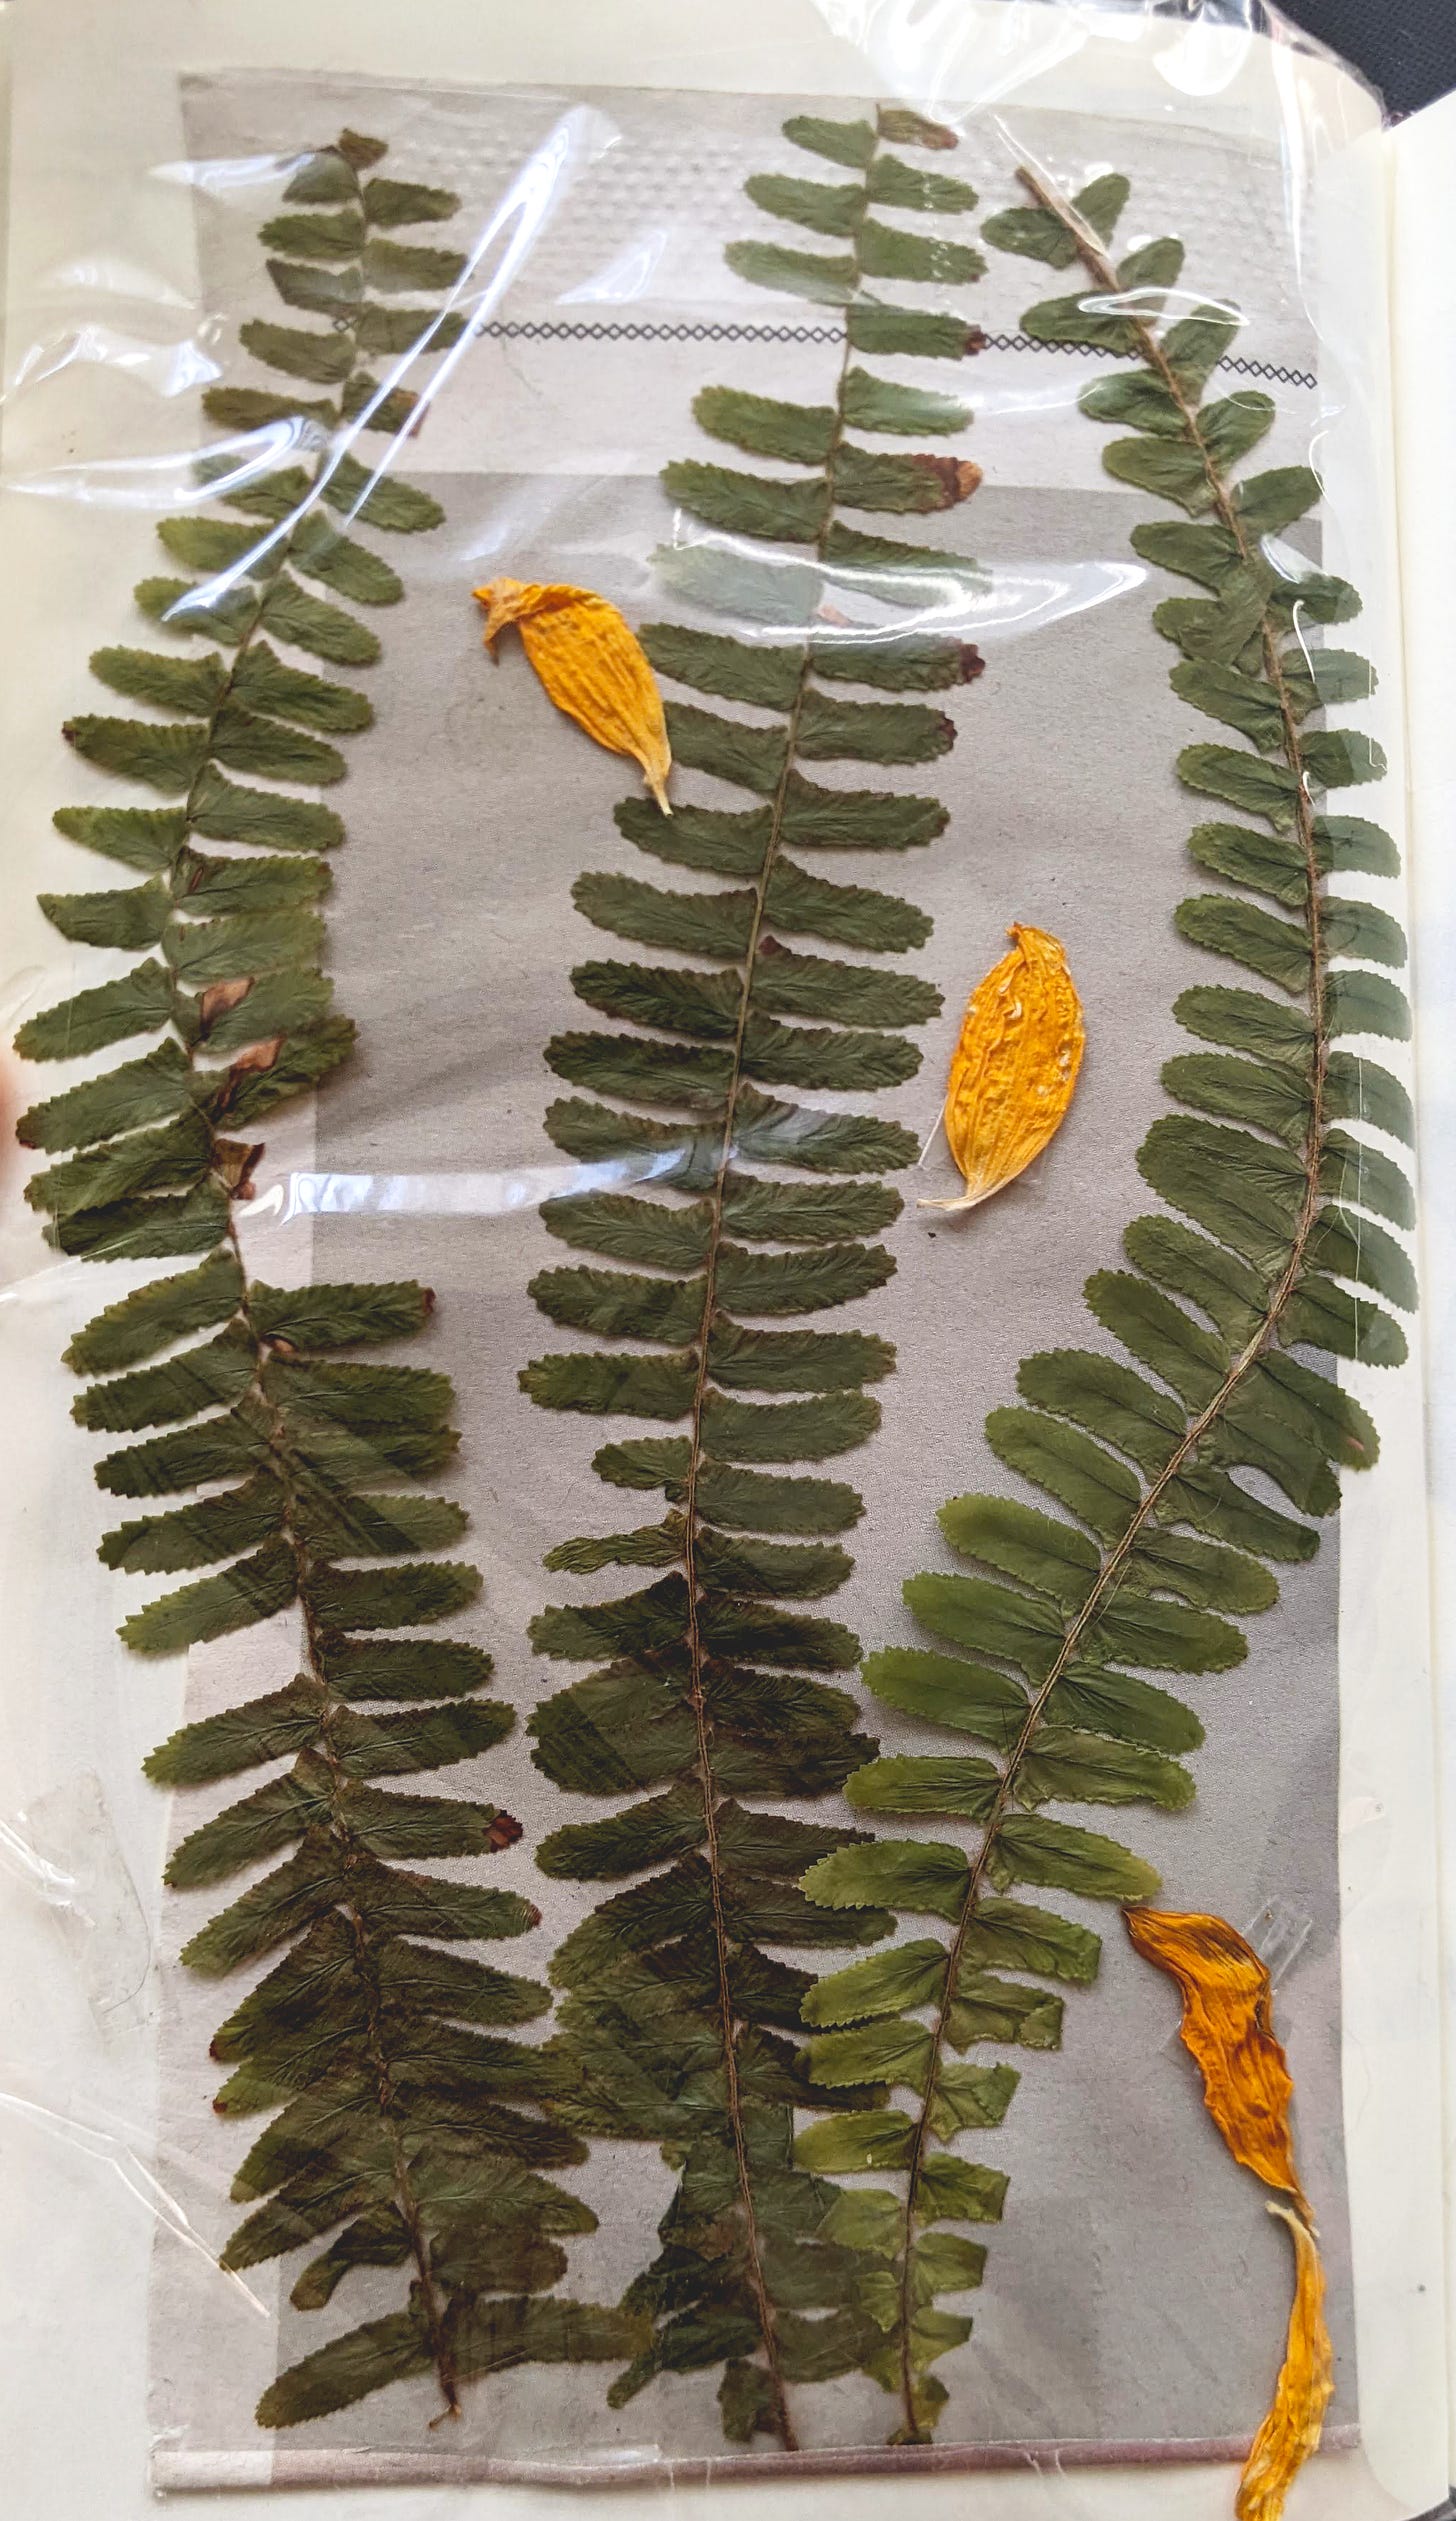 A collage with gray newspaper, long fern leaves, and dried yellow petals.